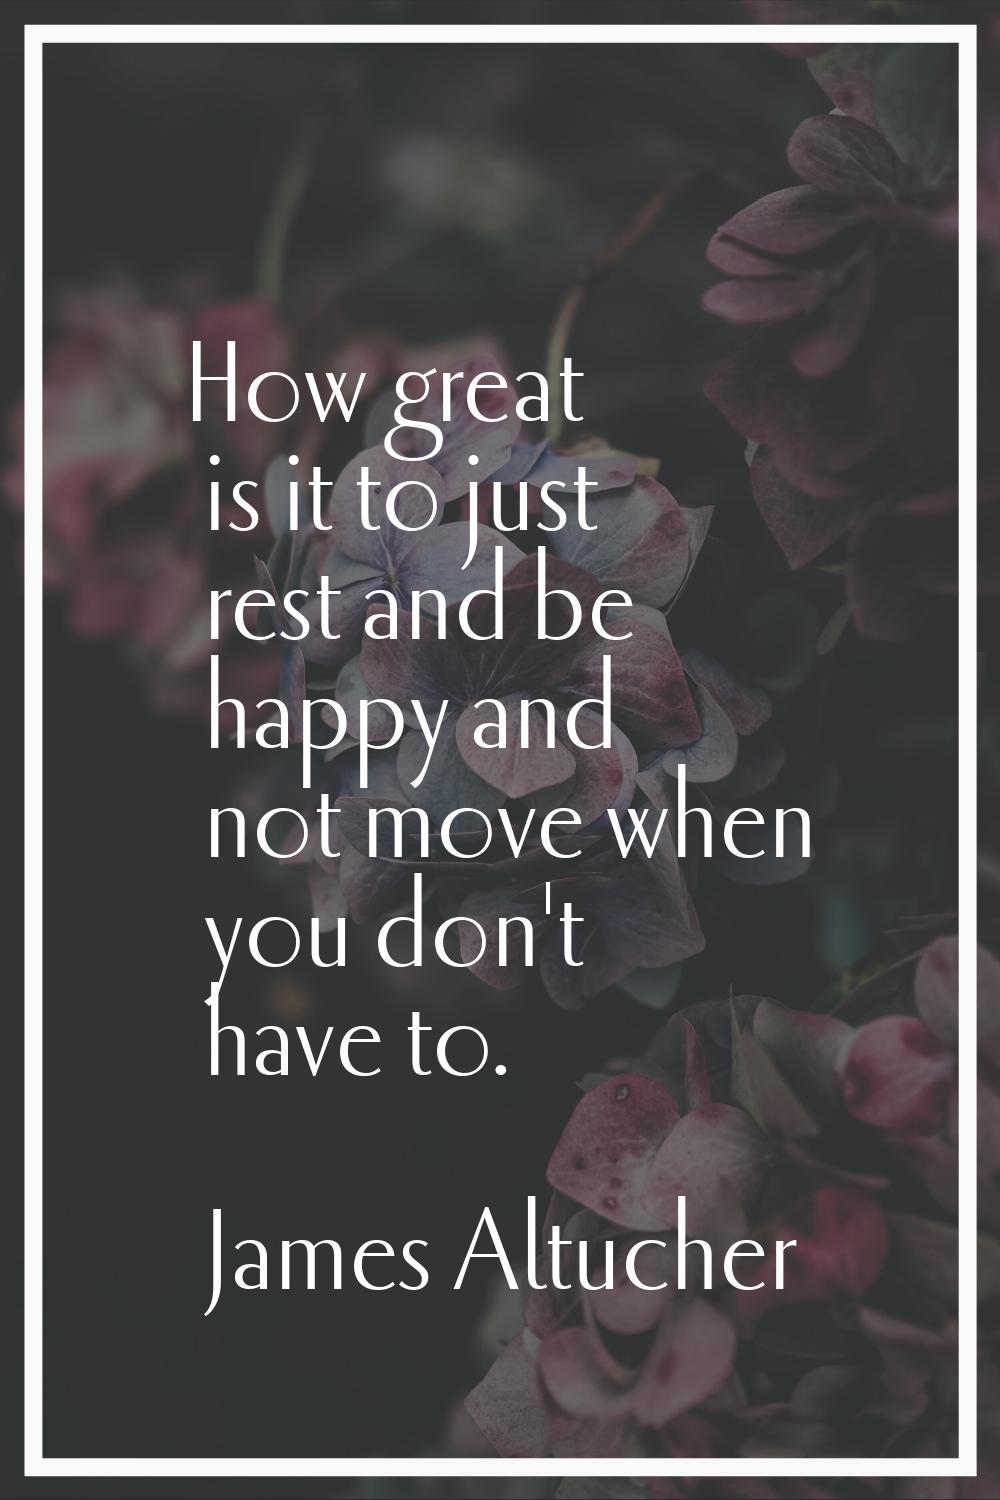 How great is it to just rest and be happy and not move when you don't have to.